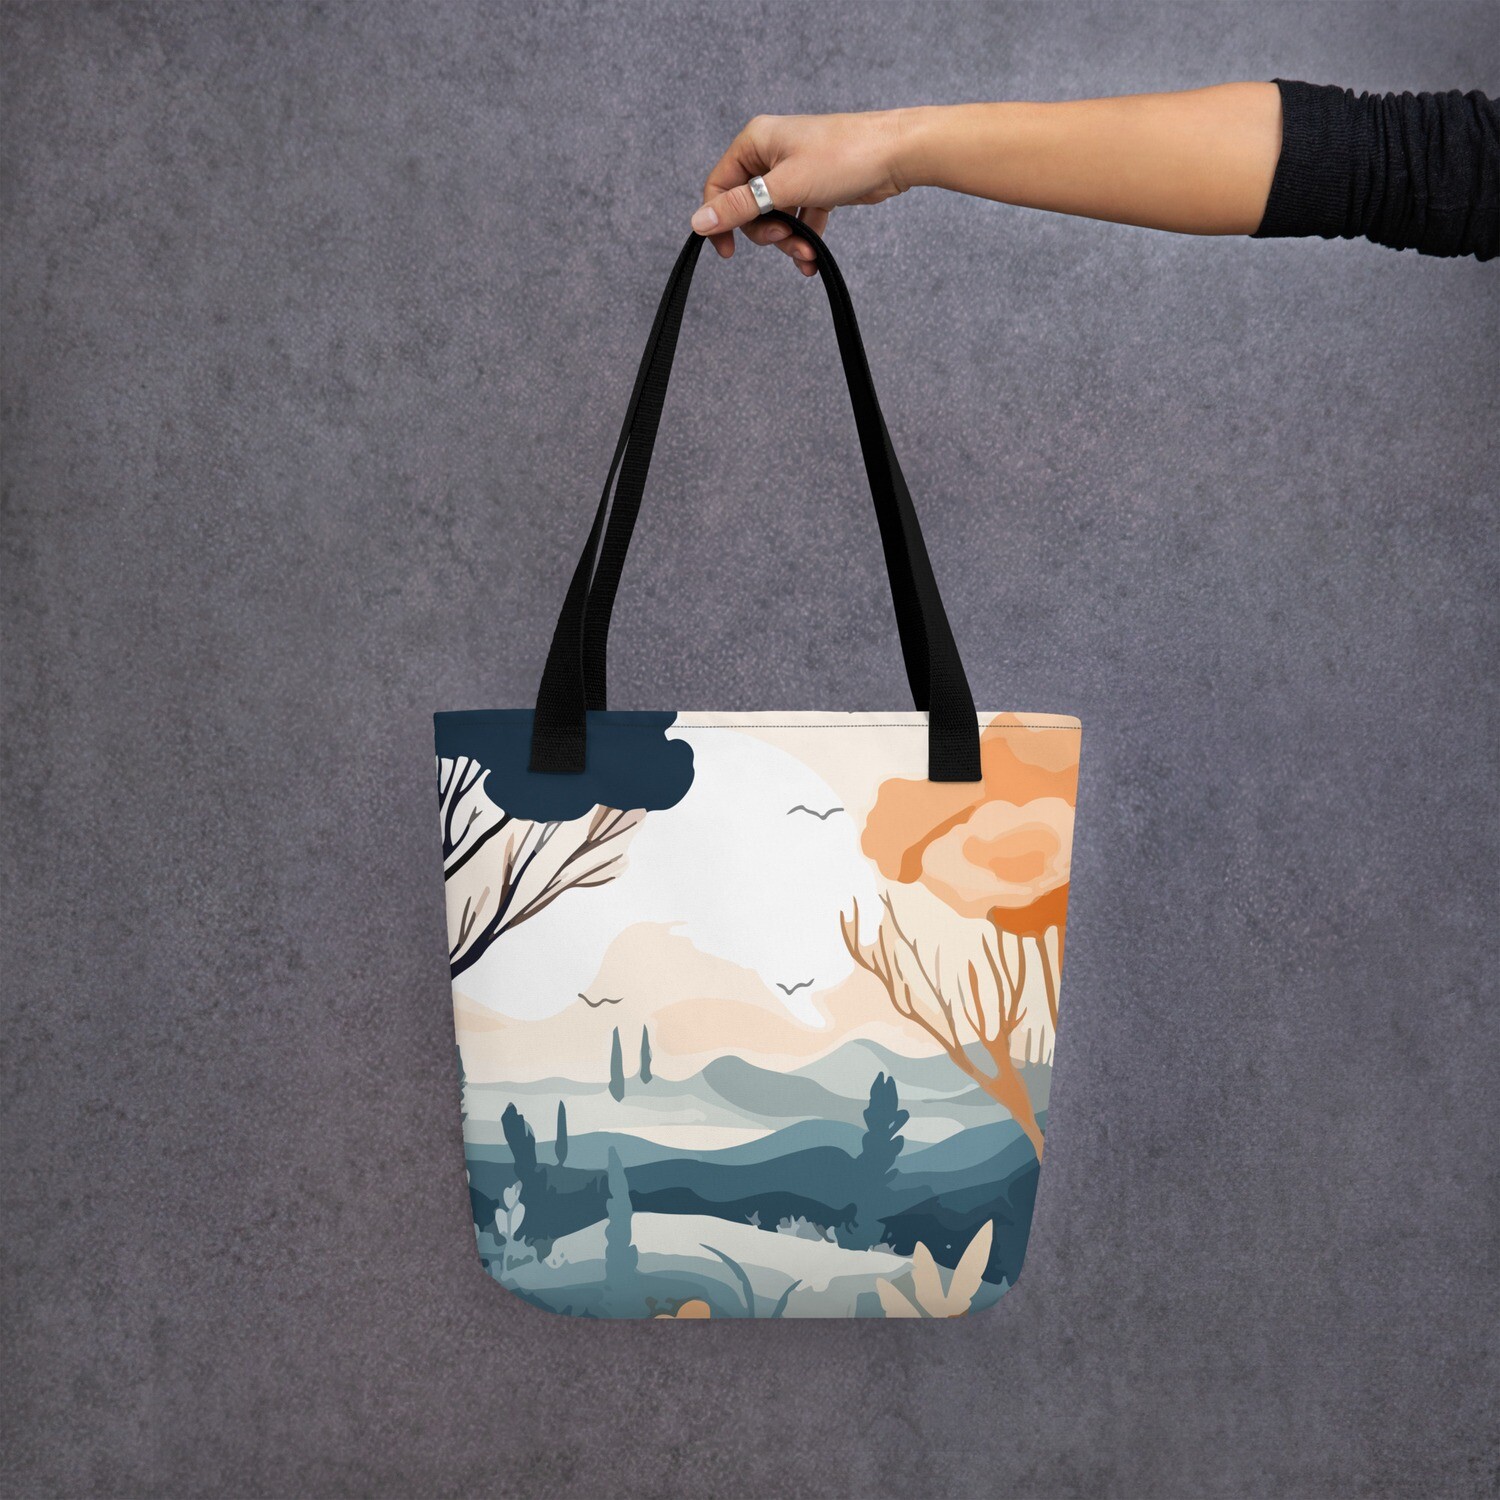 Tote bag with tropical Asian landscape in pastel colors